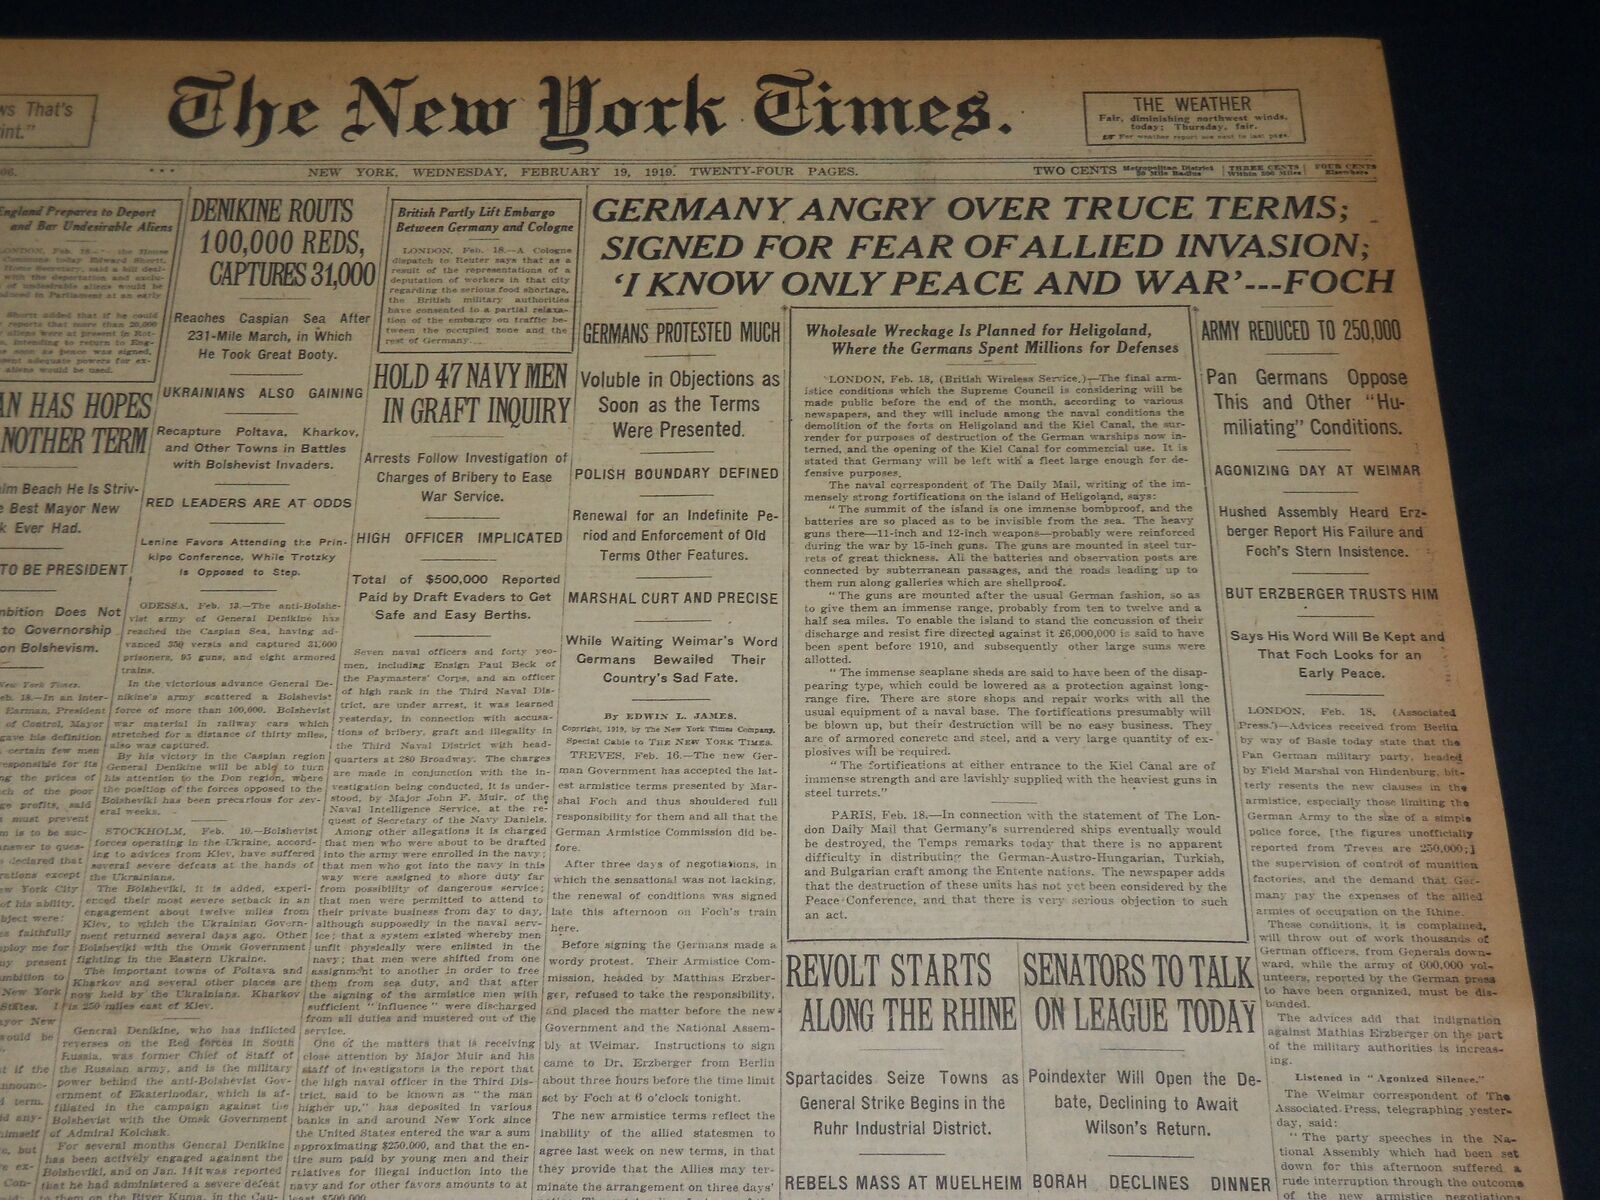 1919 FEBRUARY 19 NEW YORK TIMES - GERMANY ANGRY OVER TRUCE TERMS - NT 7976